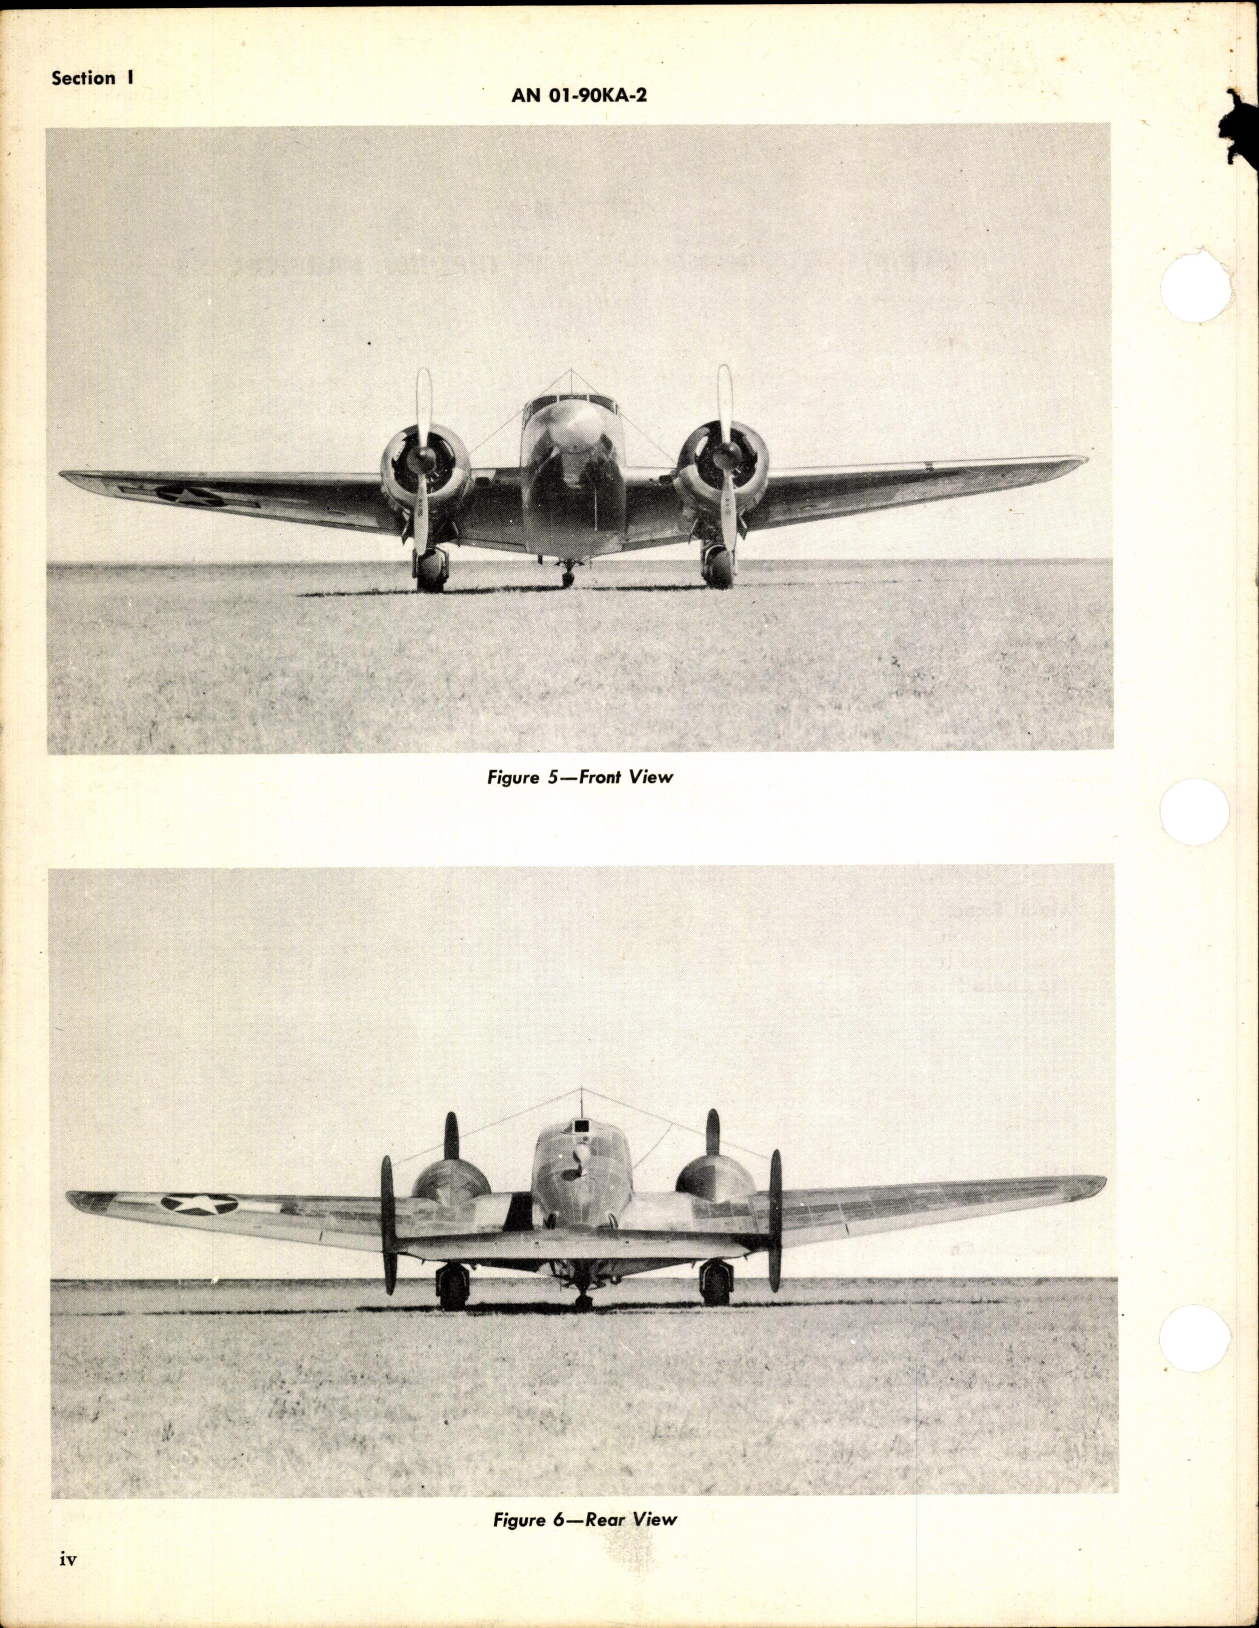 Sample page 6 from AirCorps Library document: Erection and Maintenance Instructions for AT-7, AT-7C, SNB-2, and SNB-3